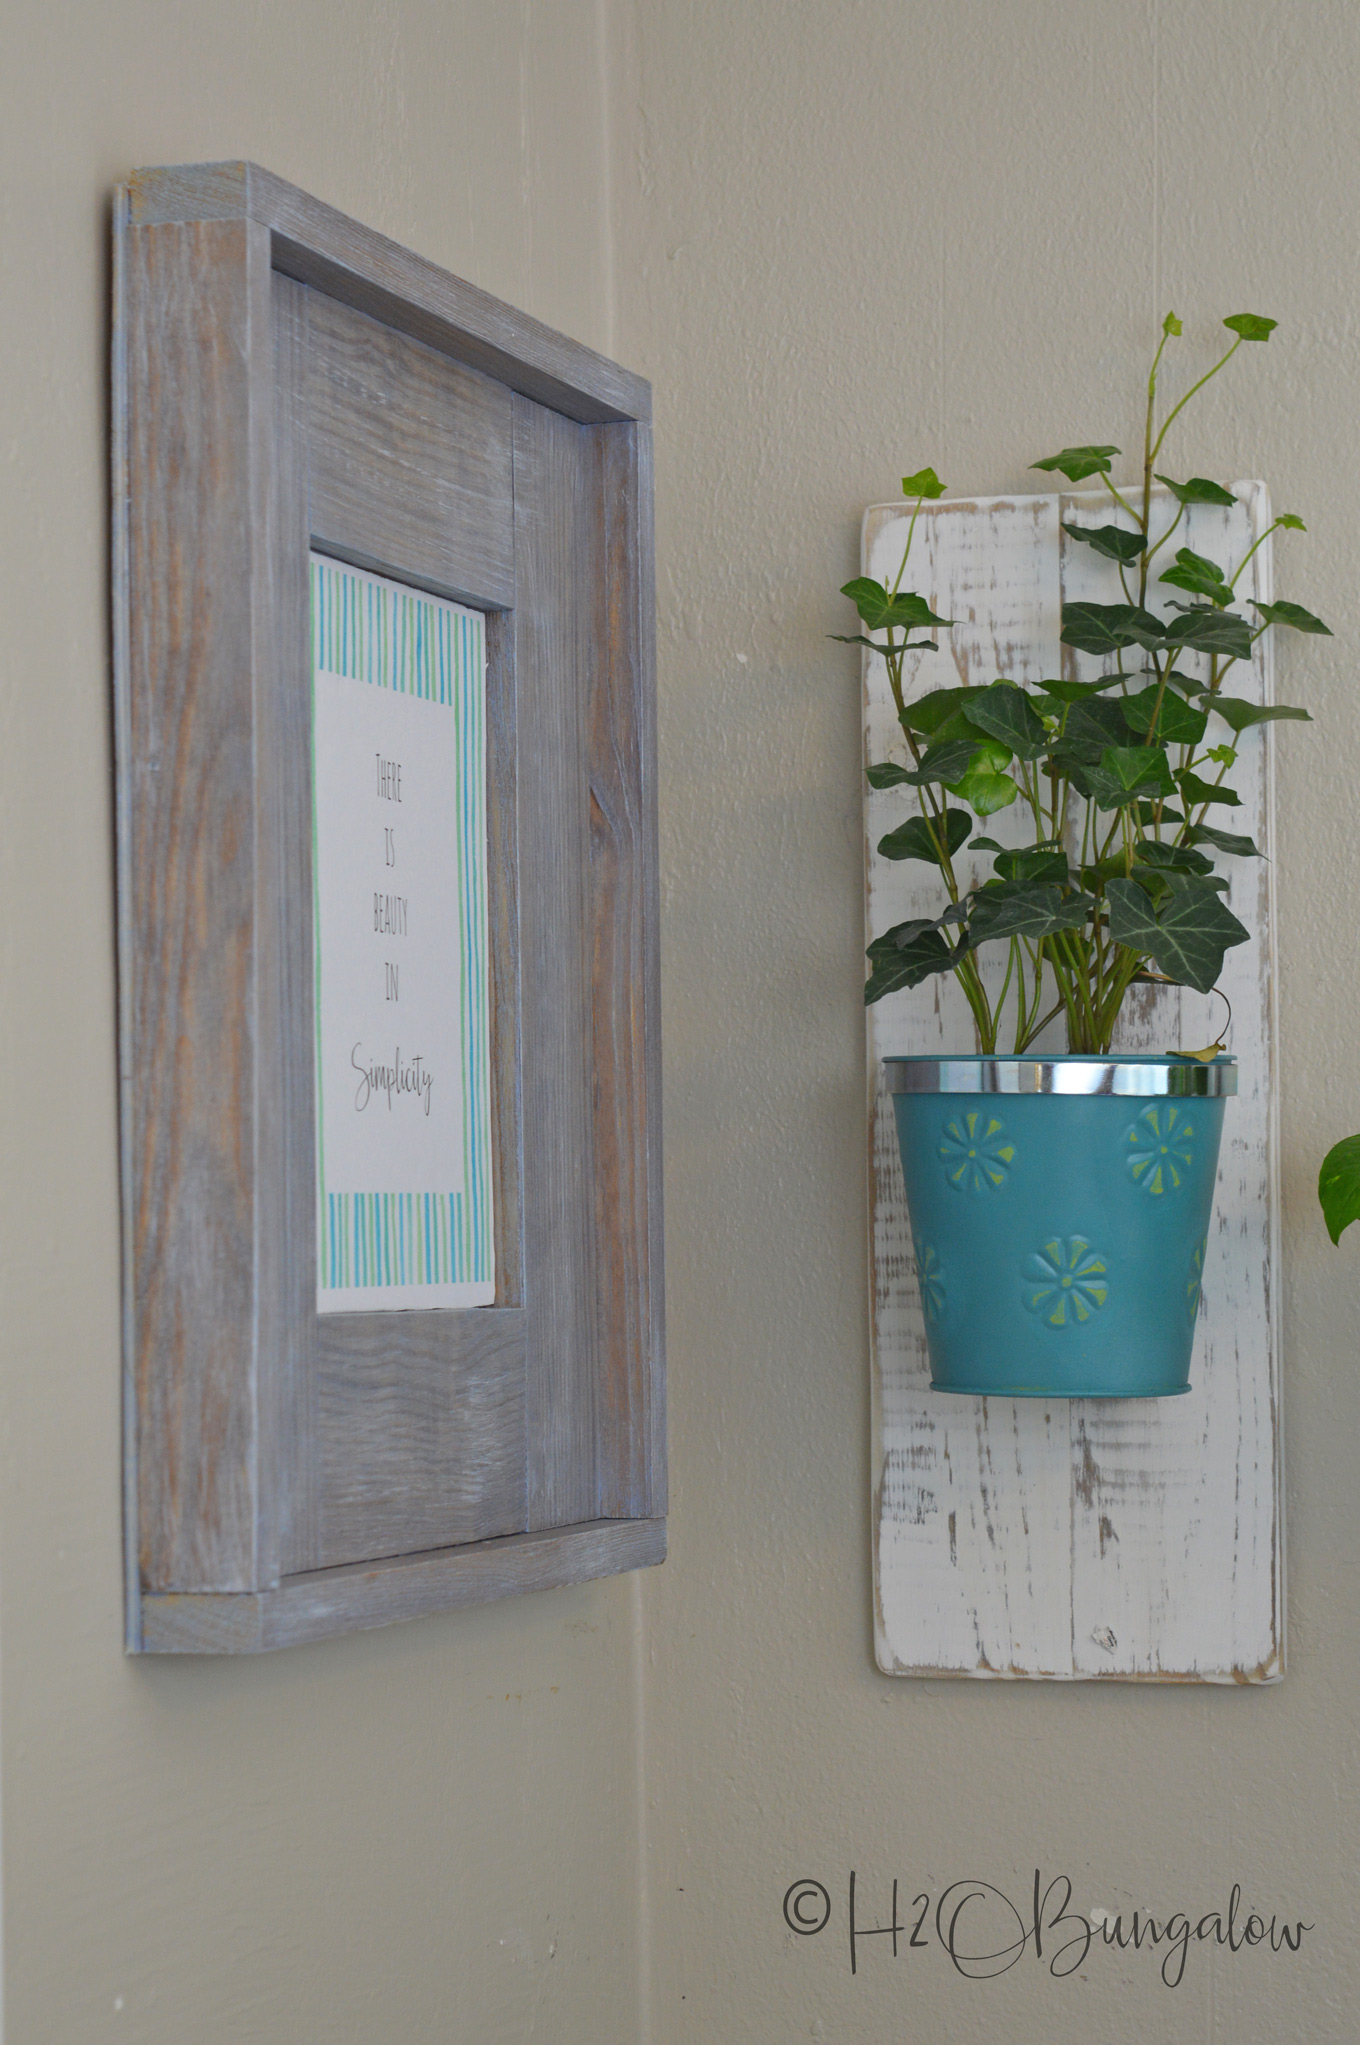 Easy Diy Rustic Picture Frame More, Diy Rustic Wooden Picture Frames